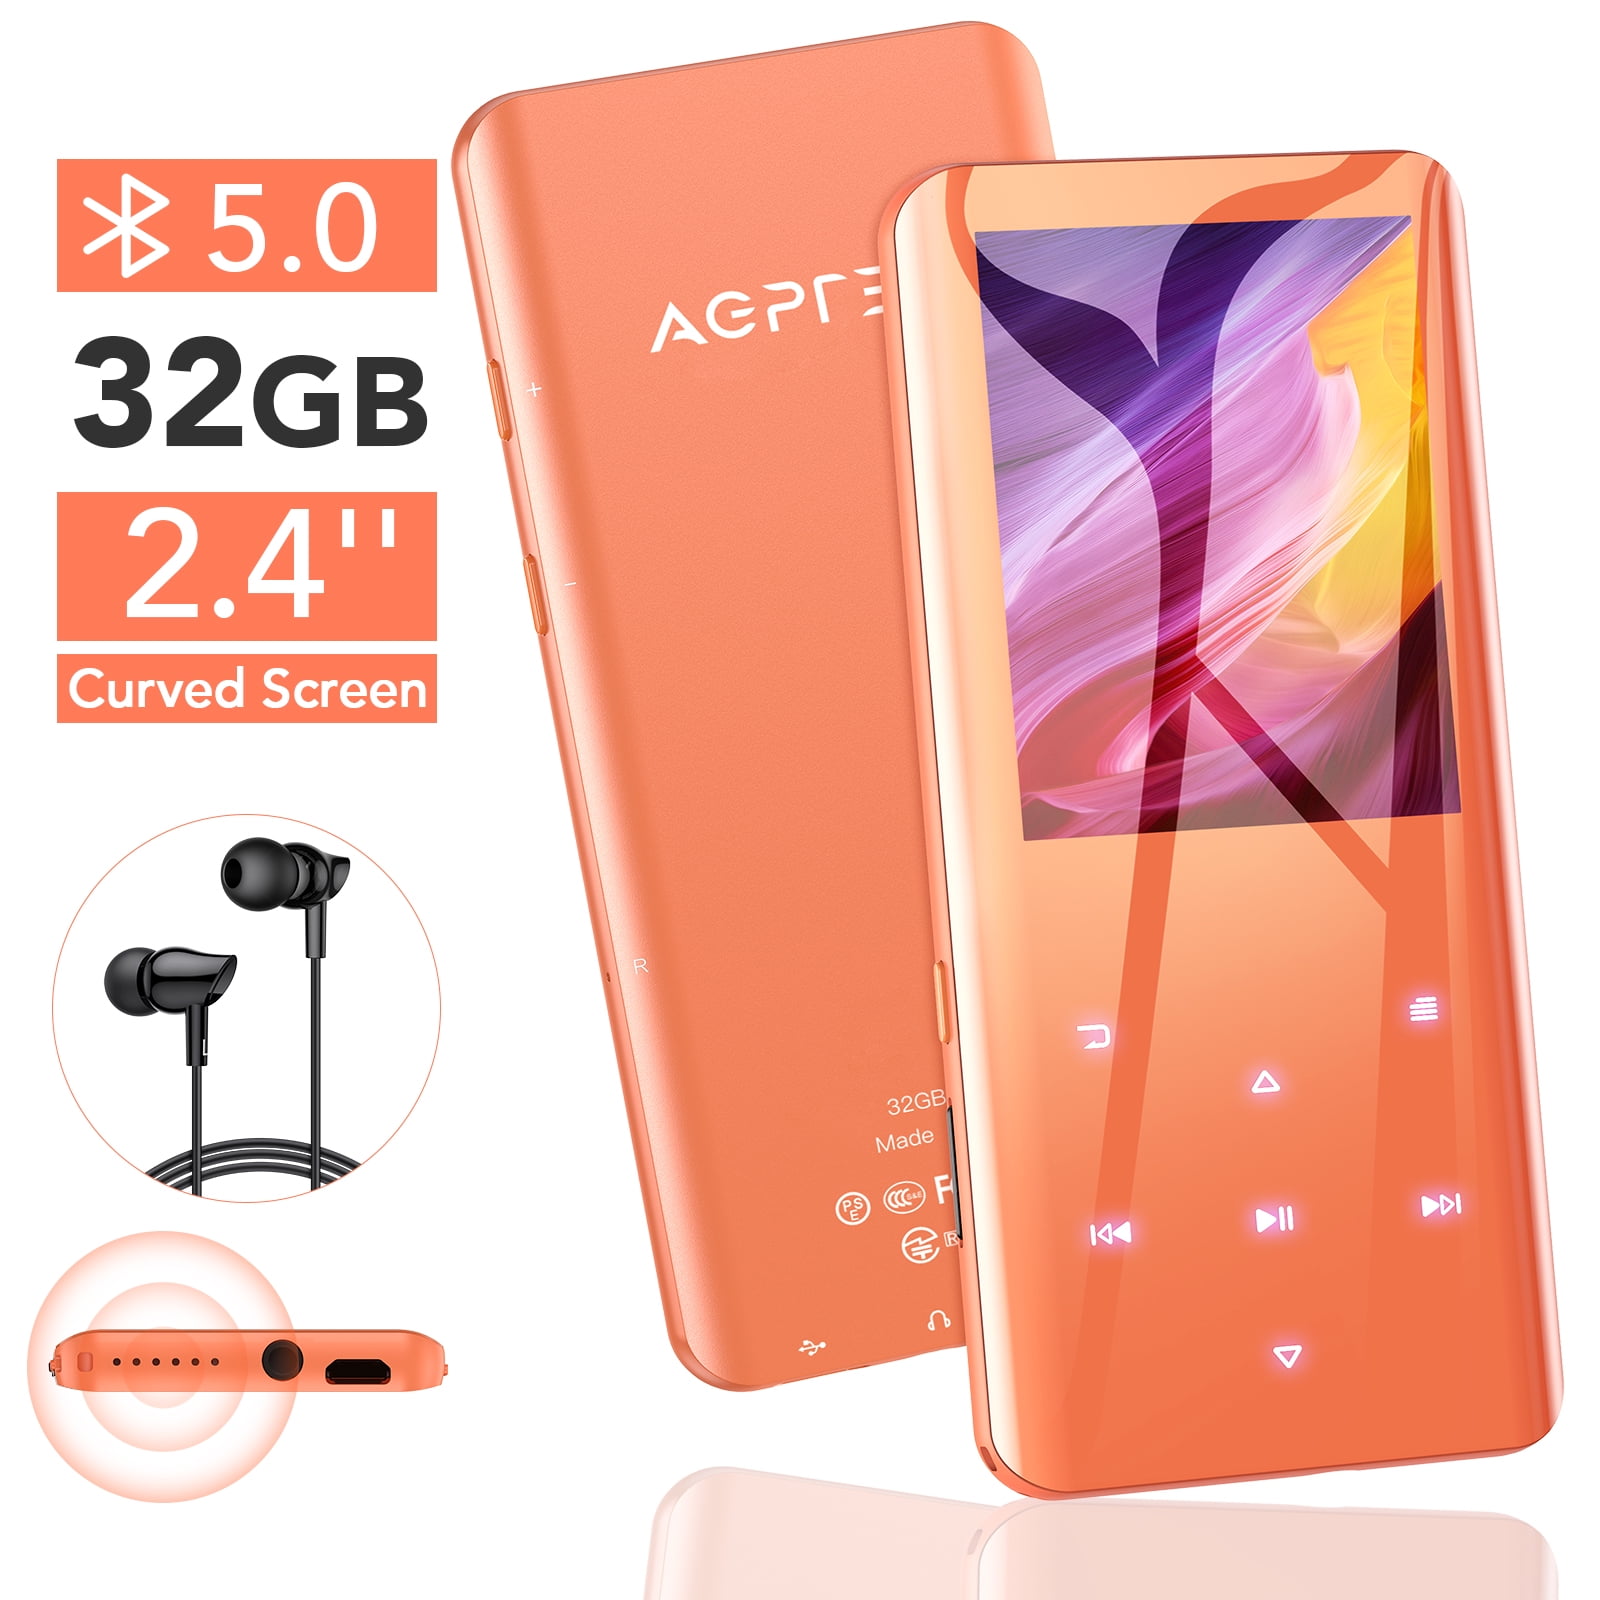 Unboxing And Reviewing The AGPTEK A19 MP3 Player 